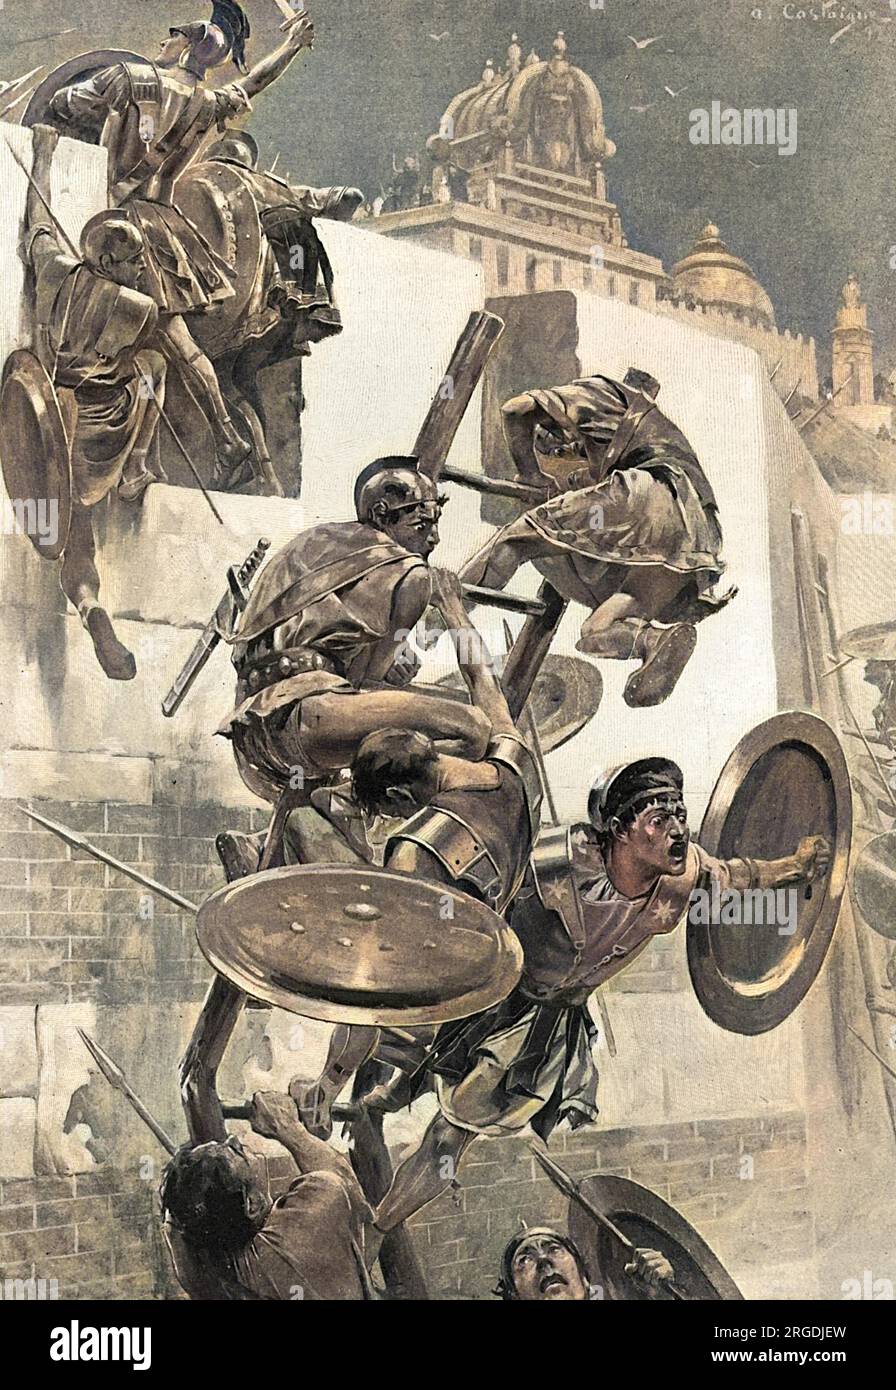 Soldiers, enthused by Alexander the Great's example, swarm up a ladder, used to attack the fortified city walls of the Mallians. The ladder breaks under their weight, leaving their leader open to attack on the ramparts, but instead of leaping back to safety, Alexander fights on, into the enemies' midst: an example of his bravery, and rashness. Stock Photo